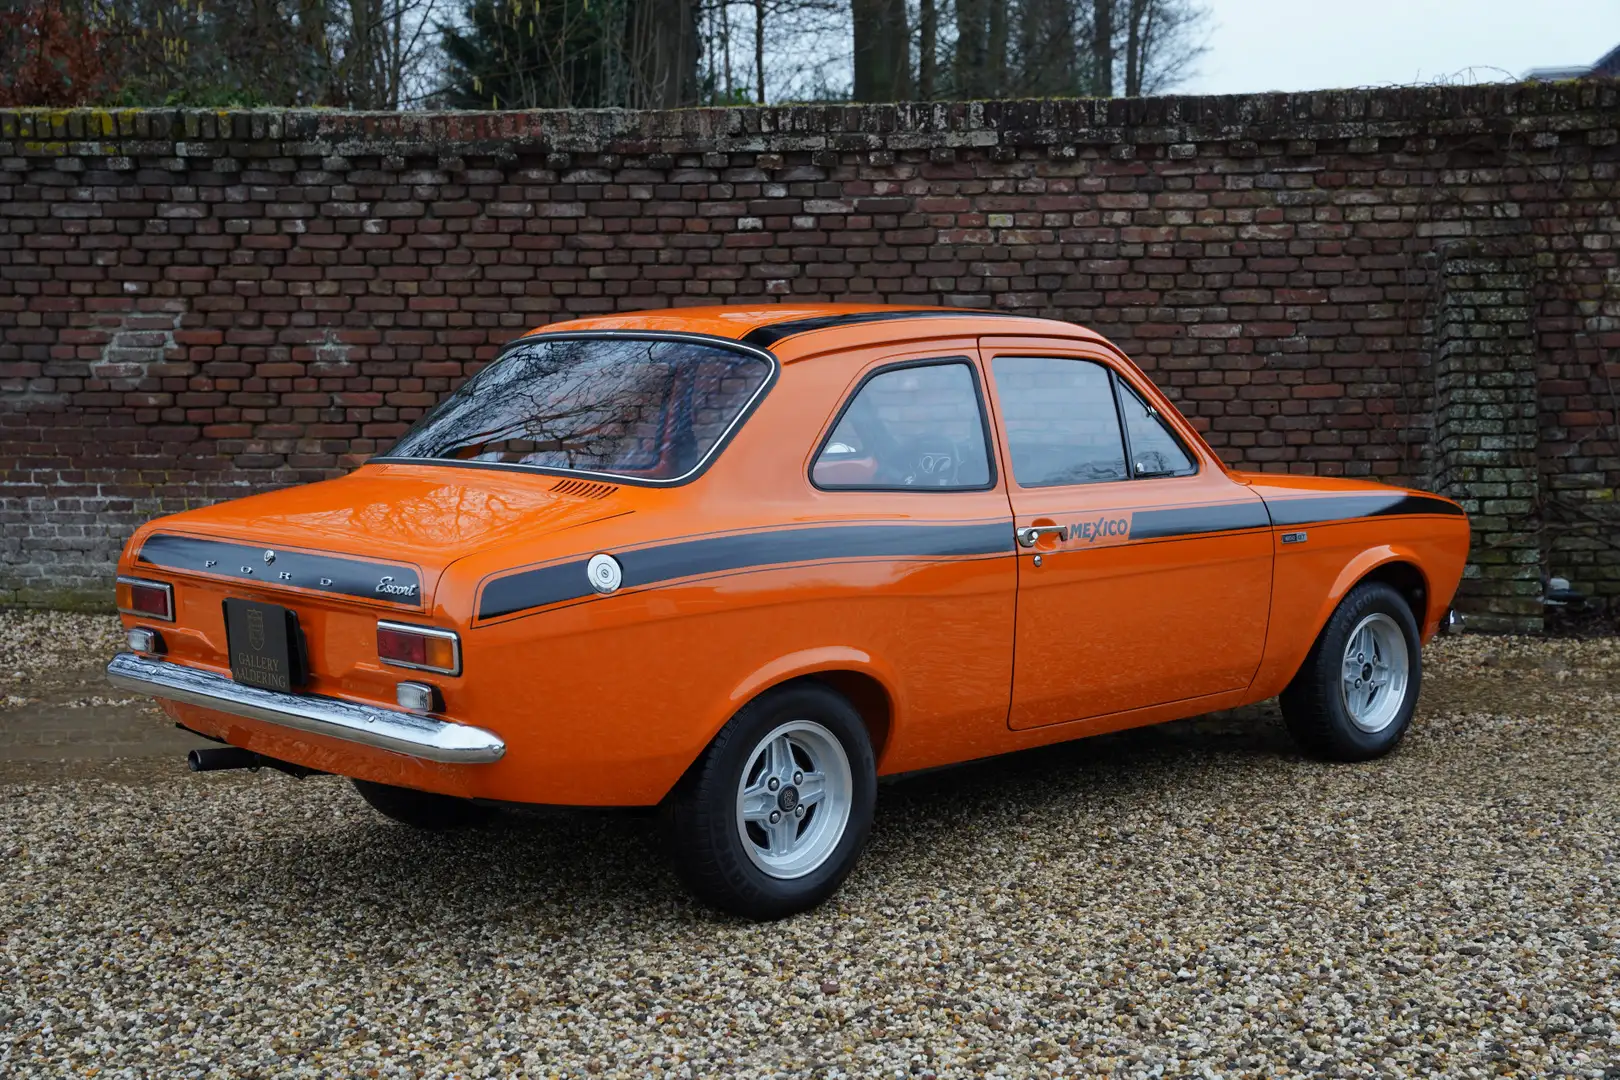 Ford Escort RS Mexico 1600 GT Mk1 Delivered new in Switzerland Oranje - 2